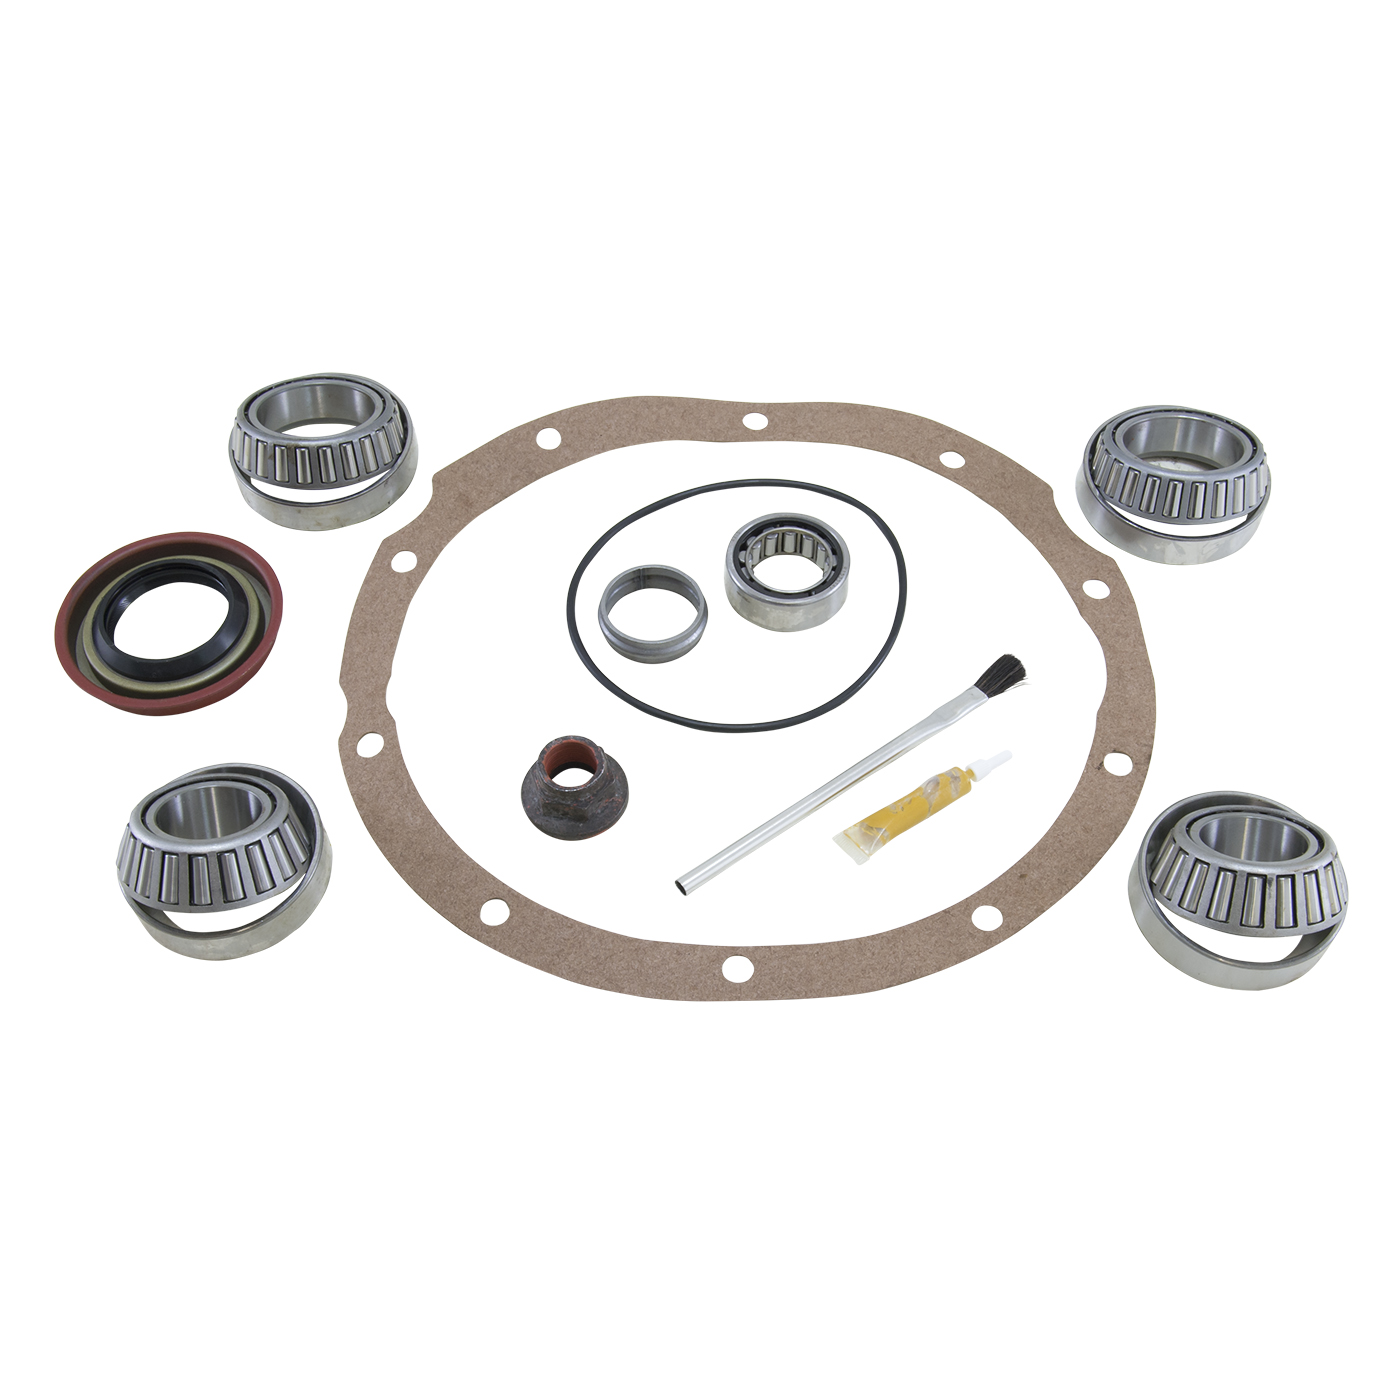 Bearing Install Kit For Ford 8 in. Diff W/Aftermarket Positraction Or Locker